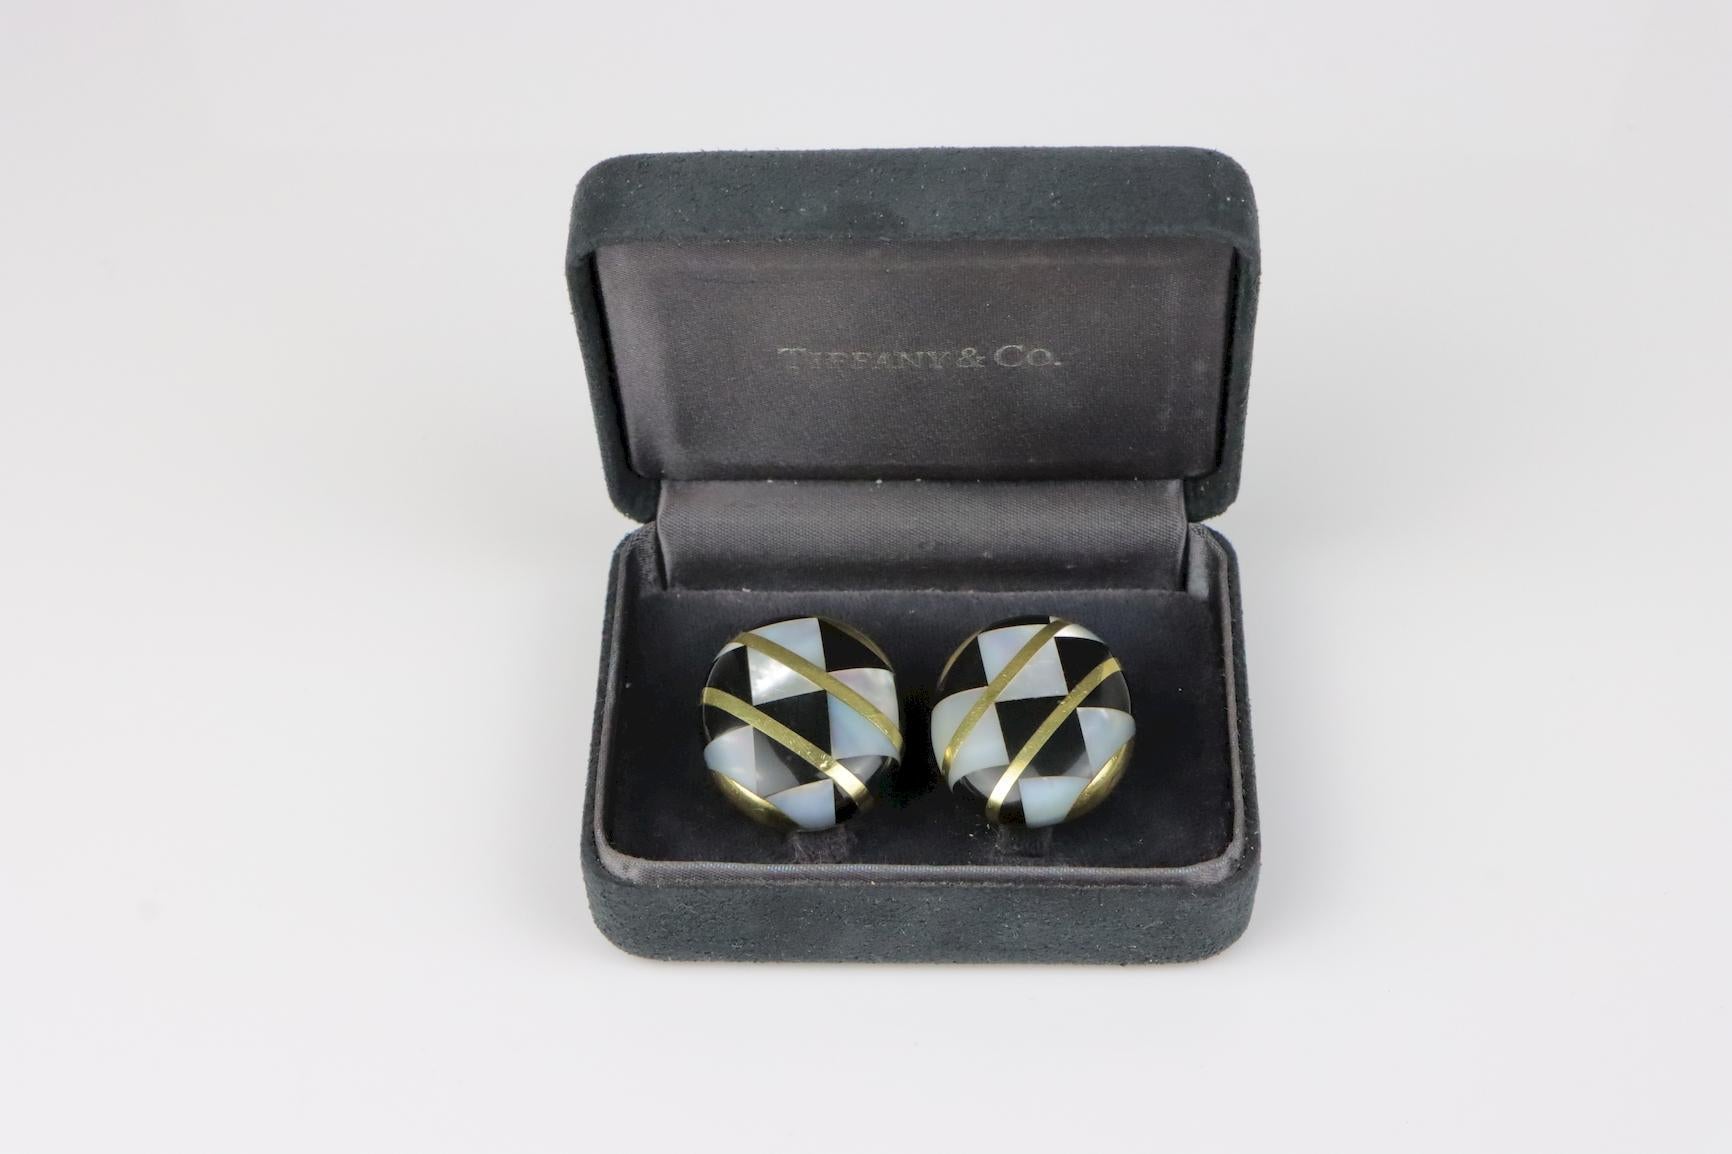 Vintage Tiffany & Co. Angela Cummings 18K Gold Earrings  - Large Model 
Large model example

Materials:
Solid 18K Gold, Mother of Pearl & Onyx Inlay

Approximate Dimensions:
3 cm (Length) x 2.5 cm (Width) x 9.30 mm (Thickness) 
28 grams in weight